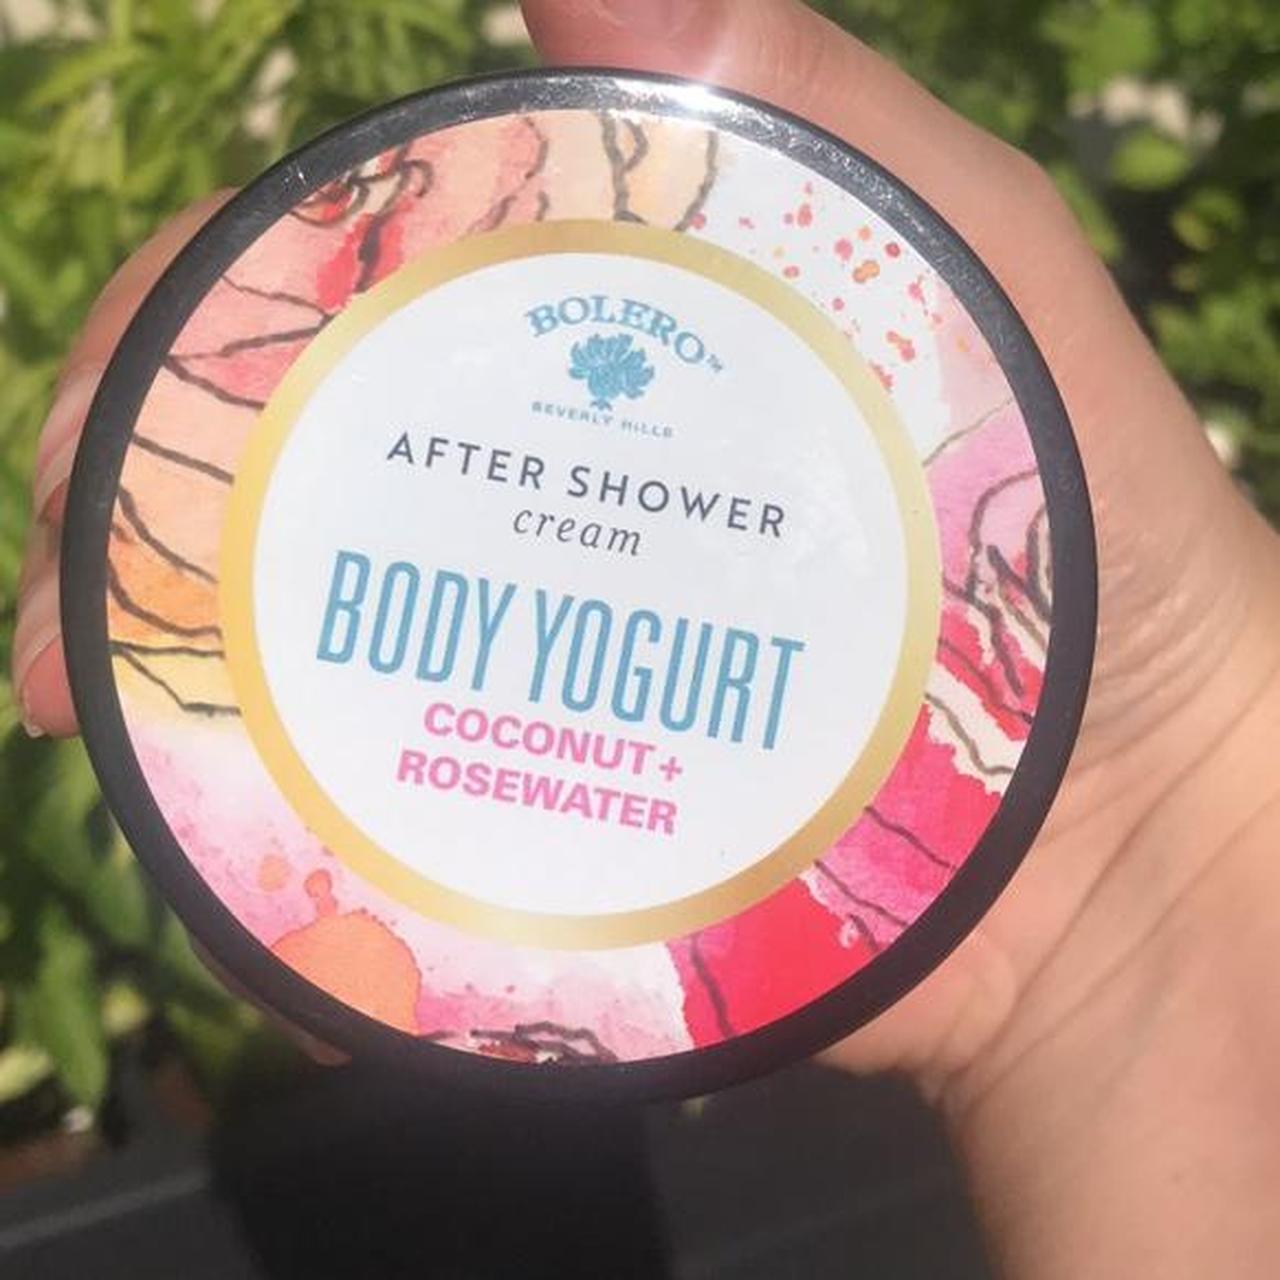 Product Image 3 - After shower body yogurt coconut